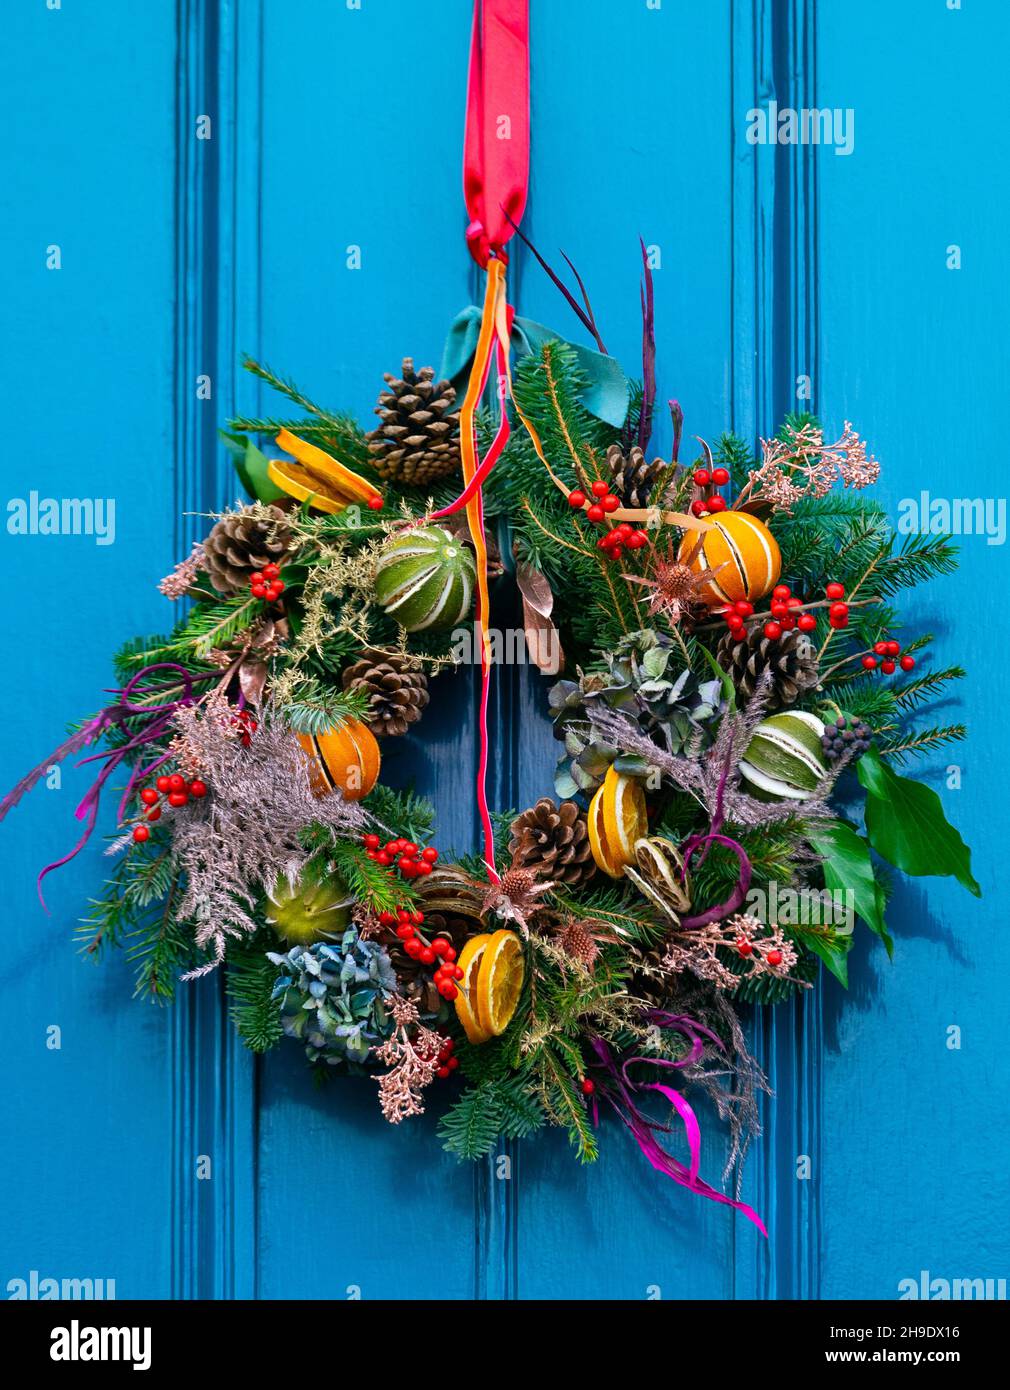 Traditional Christmas floral wreath on door of house in Edinburgh new Town, Scotland, UK Stock Photo